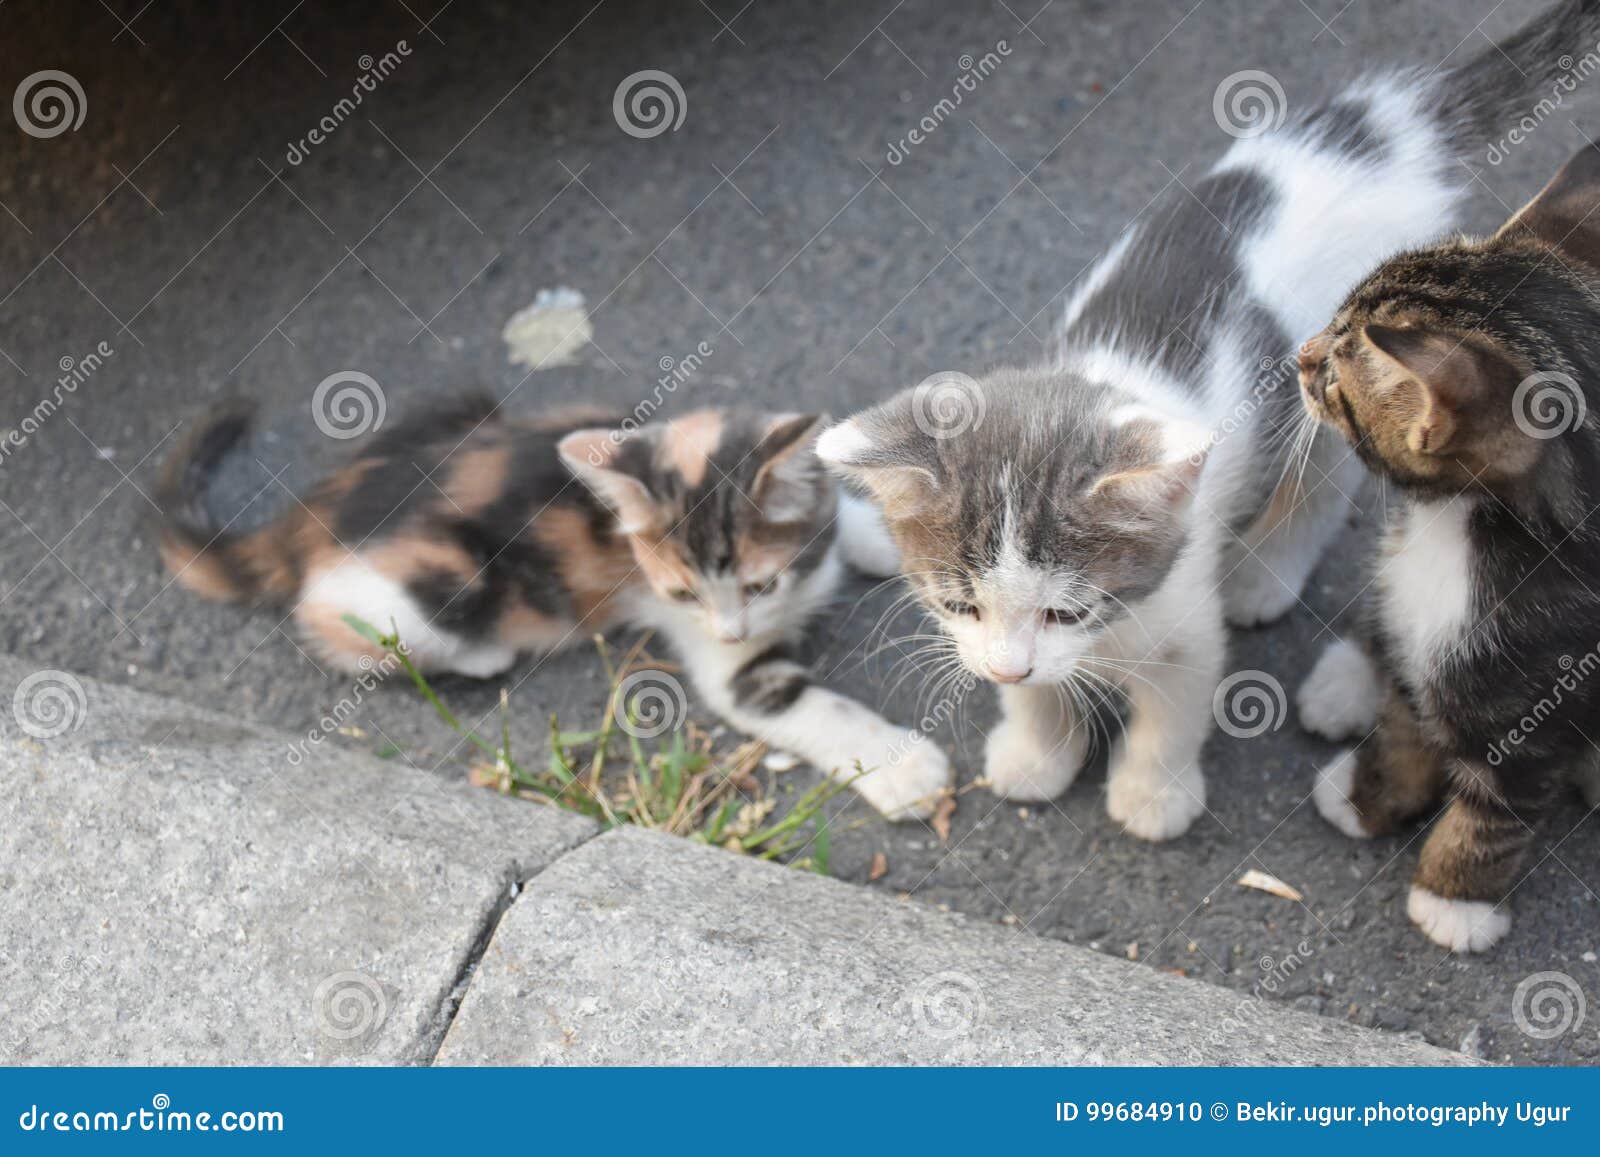 three young cute kittens playing in